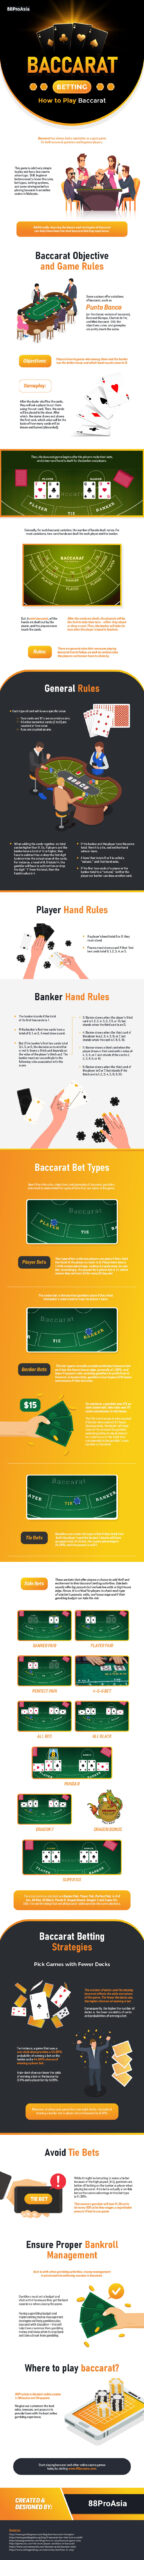 Baccarat-Betting-How-to-Play-Baccarat-Online-Casino-Betting-Malaysia-Singapore